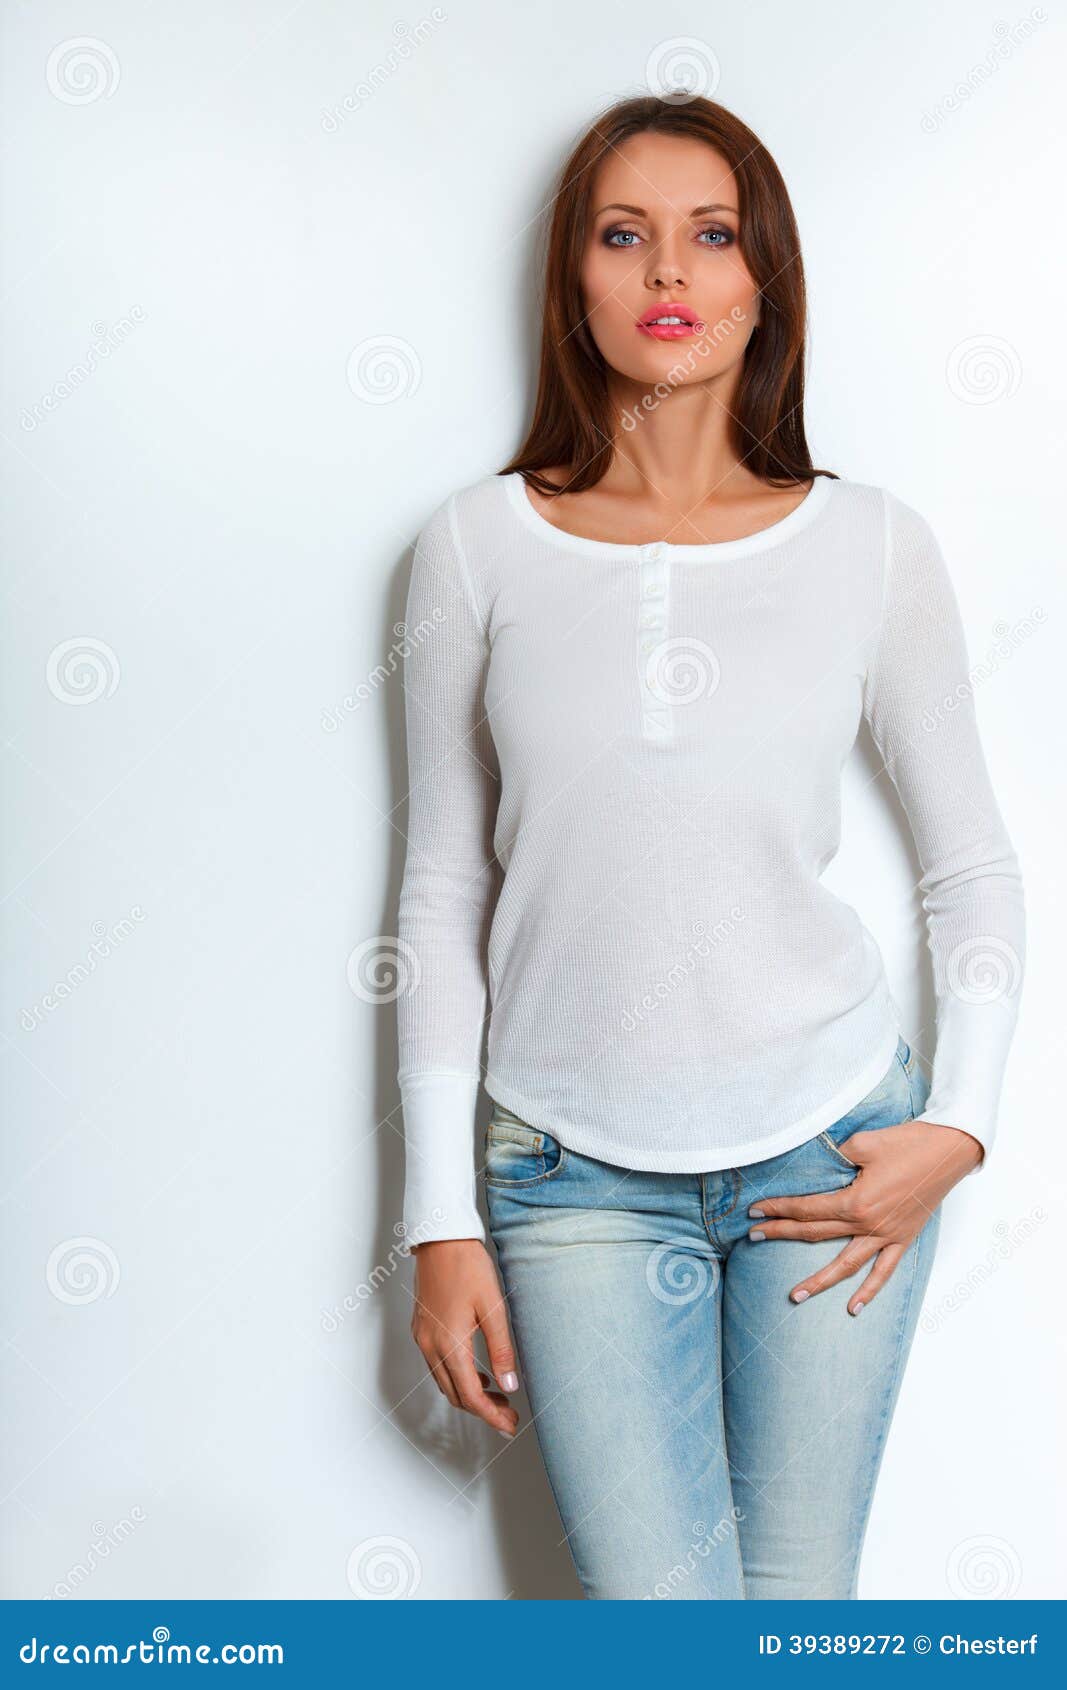 Woman standing near wall stock photo. Image of perfection - 39389272